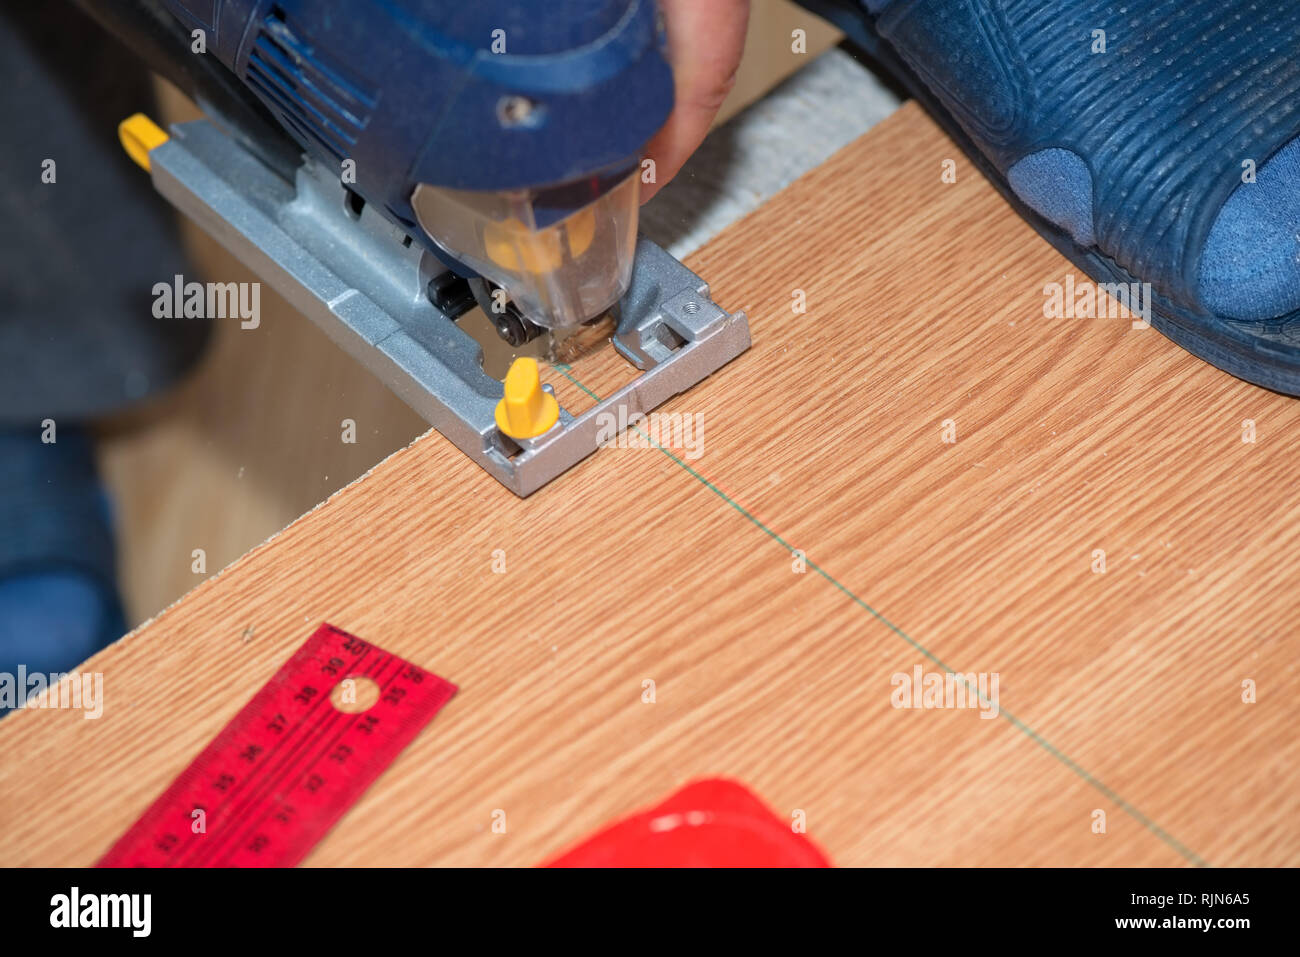 Electrical machine cutting a wooden plank Stock Photo